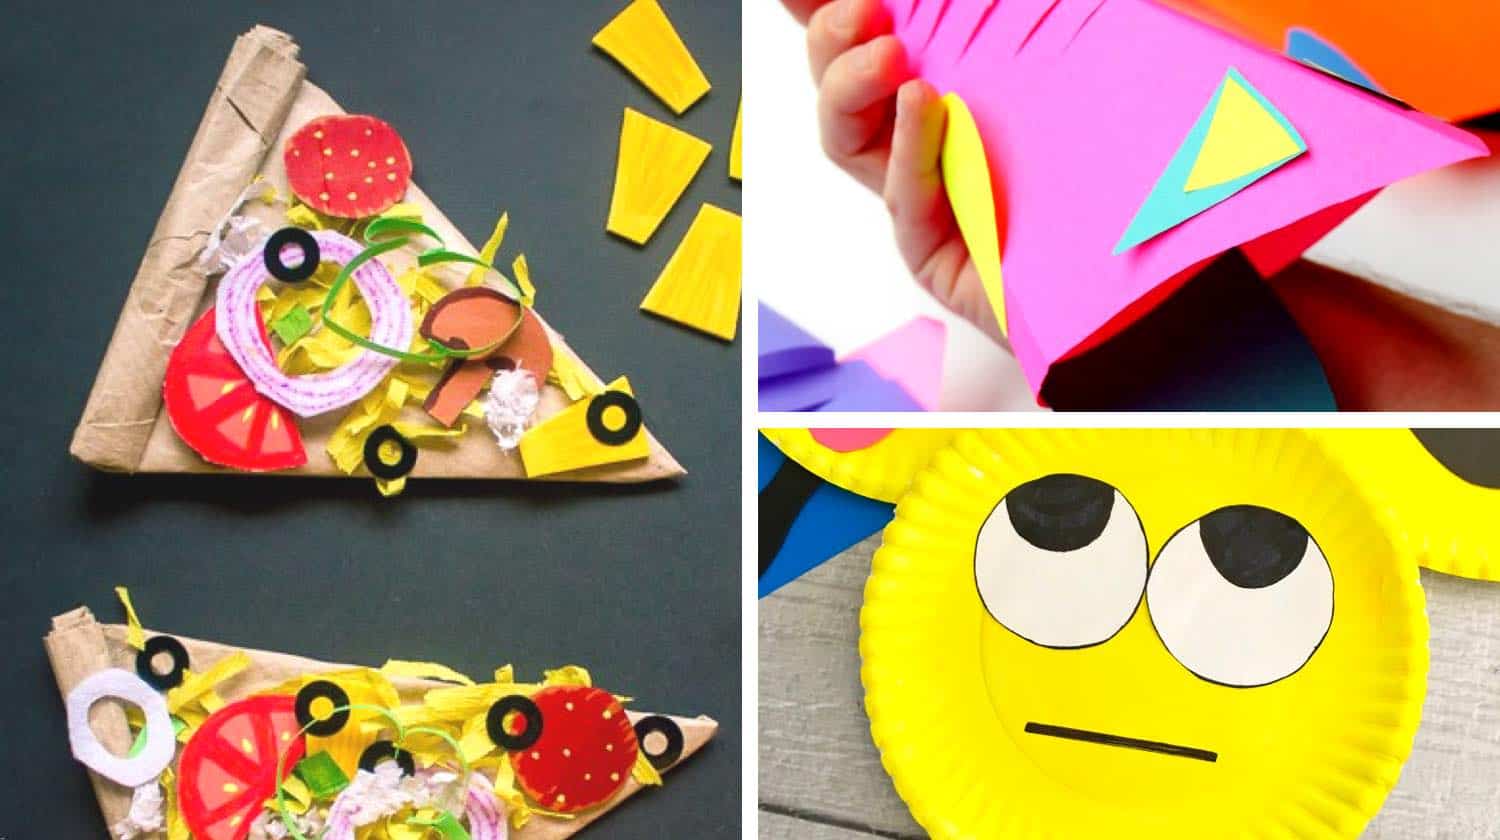 chant Should digest 23 Fun And Creative DIY Paper Craft Ideas For Kids - Crazy Laura